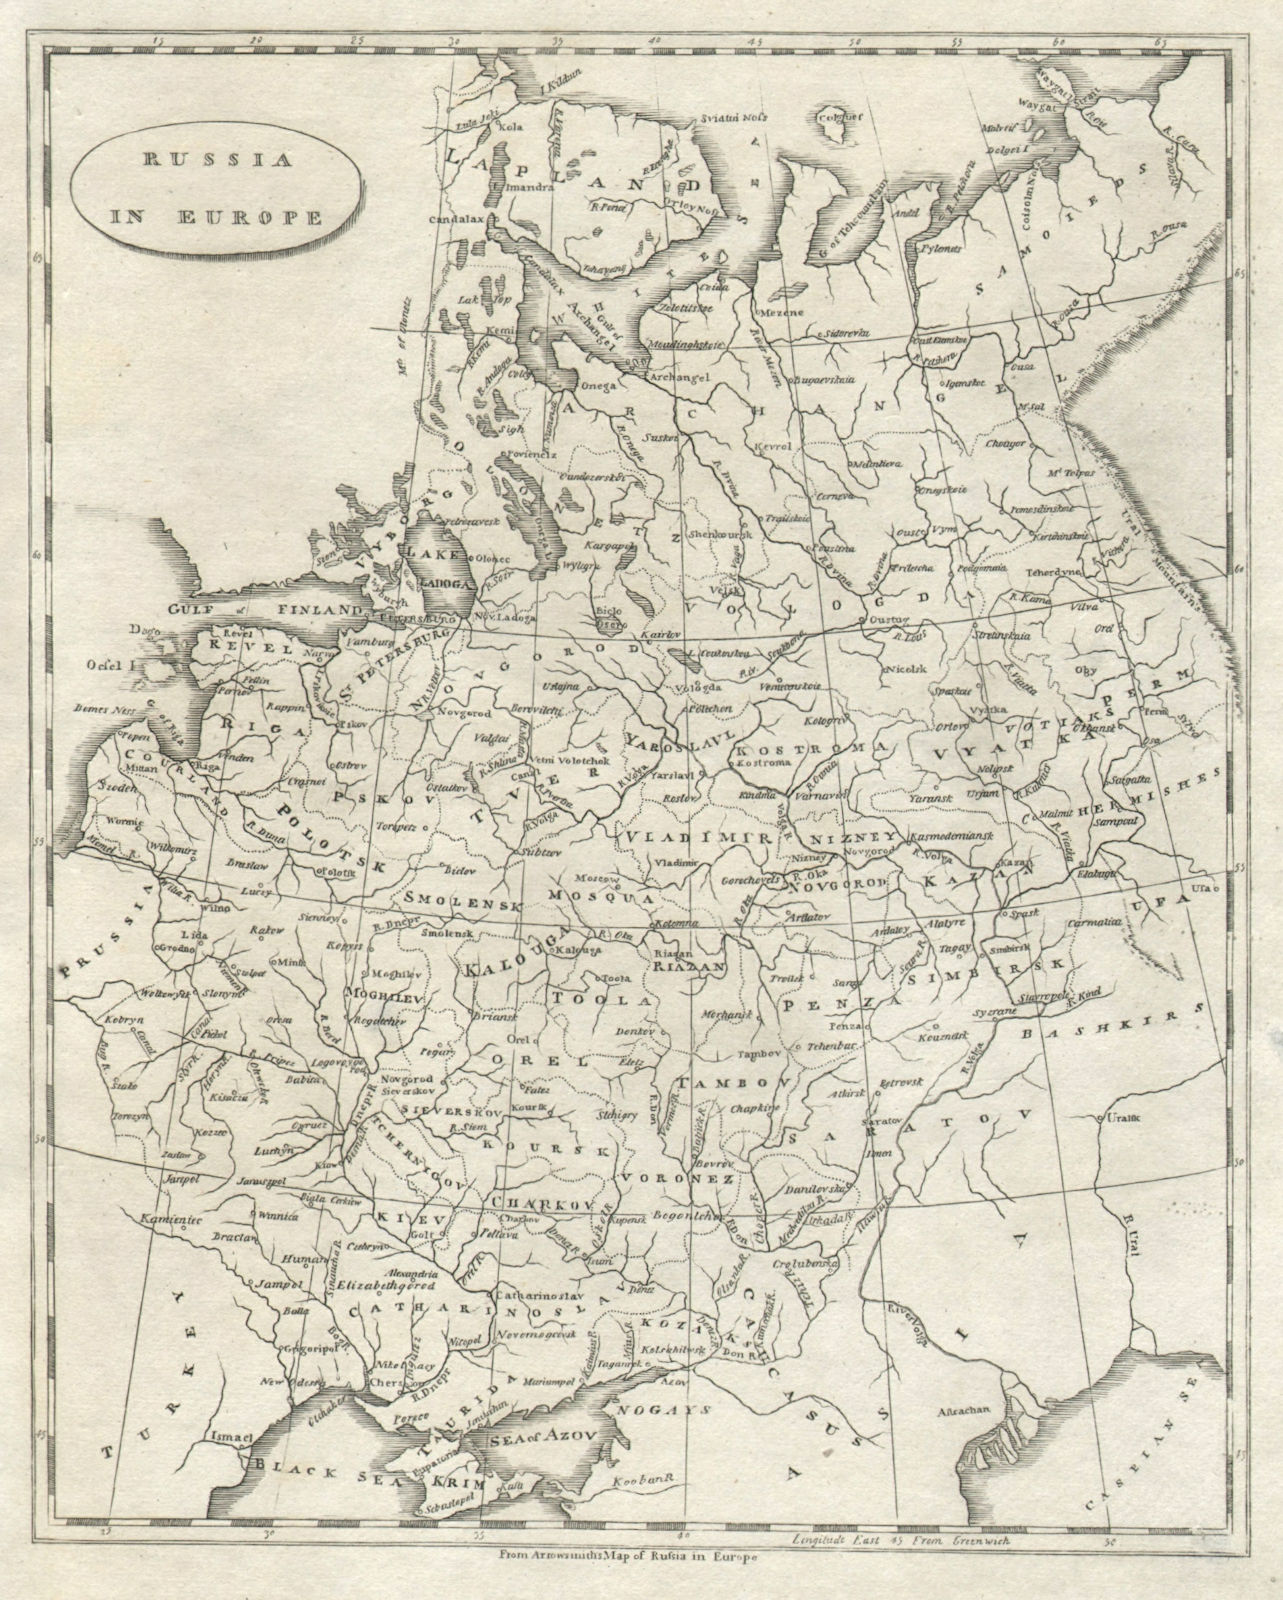 Associate Product Russia in Europe by Arrowsmith & Lewis. Ukraine & Baltic States 1812 old map